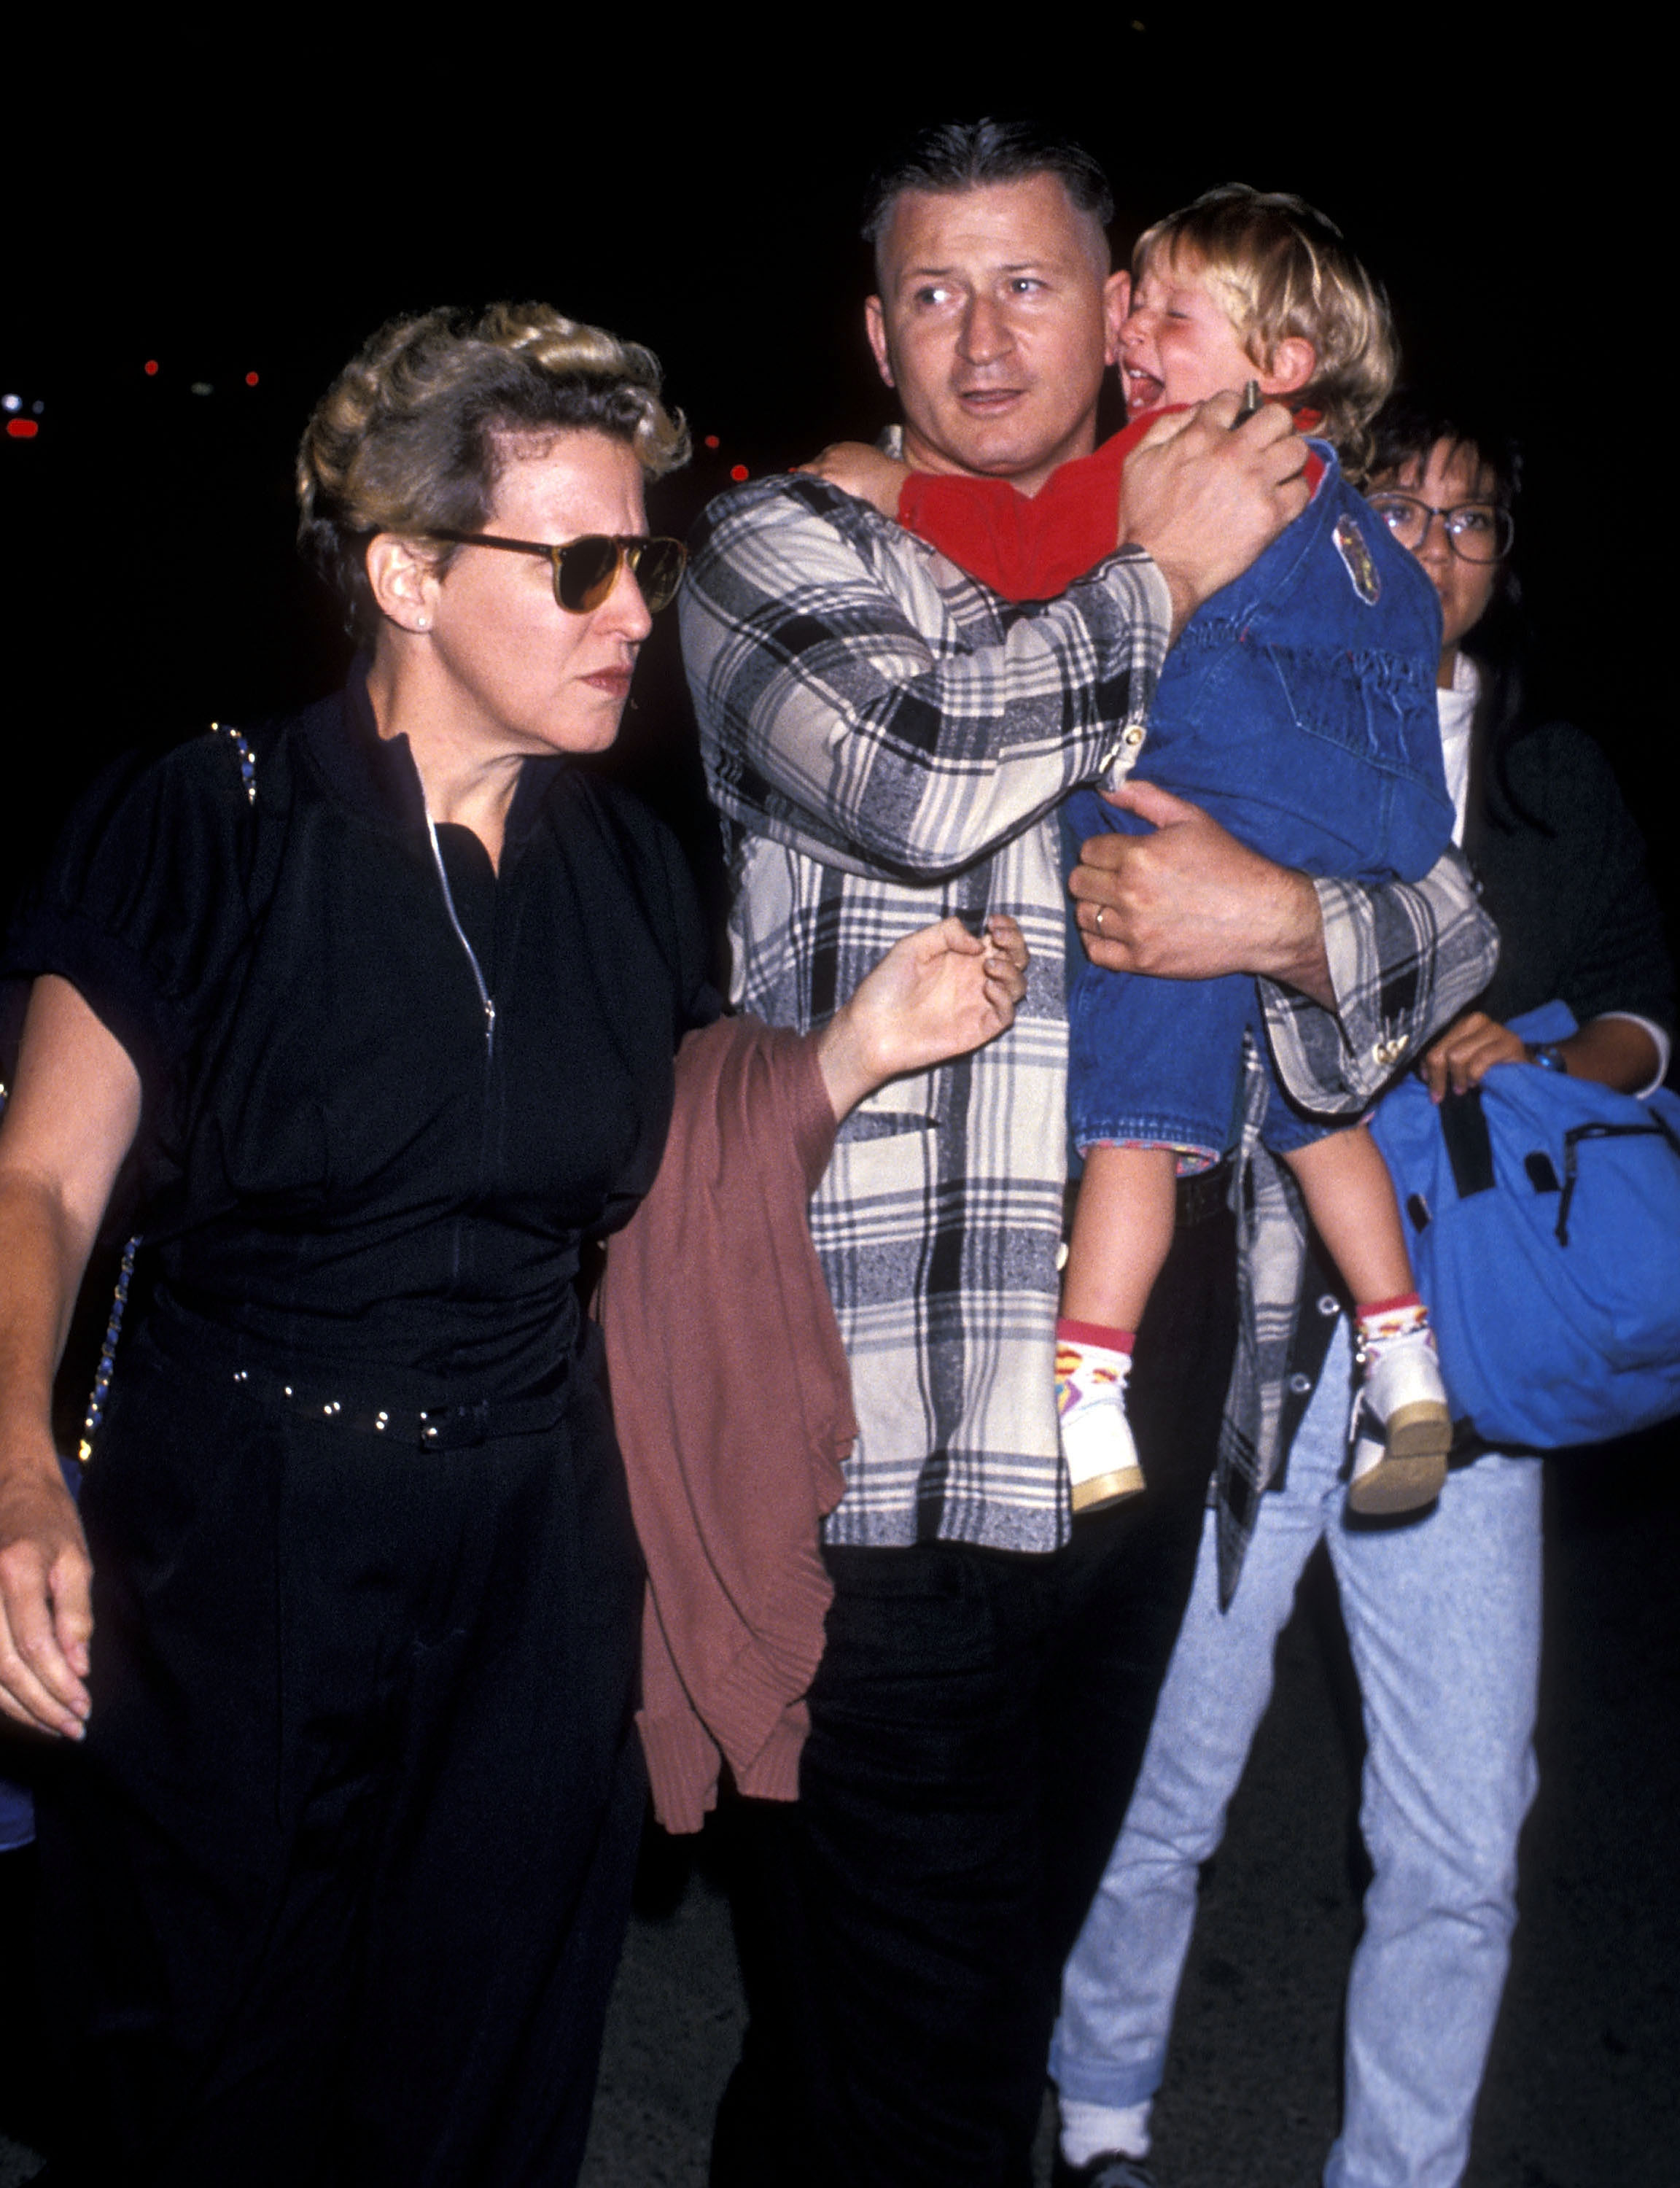 Bette Midler, Martin von Haselberg and their daughter Sophie in California in 1989 | Source: Getty Images